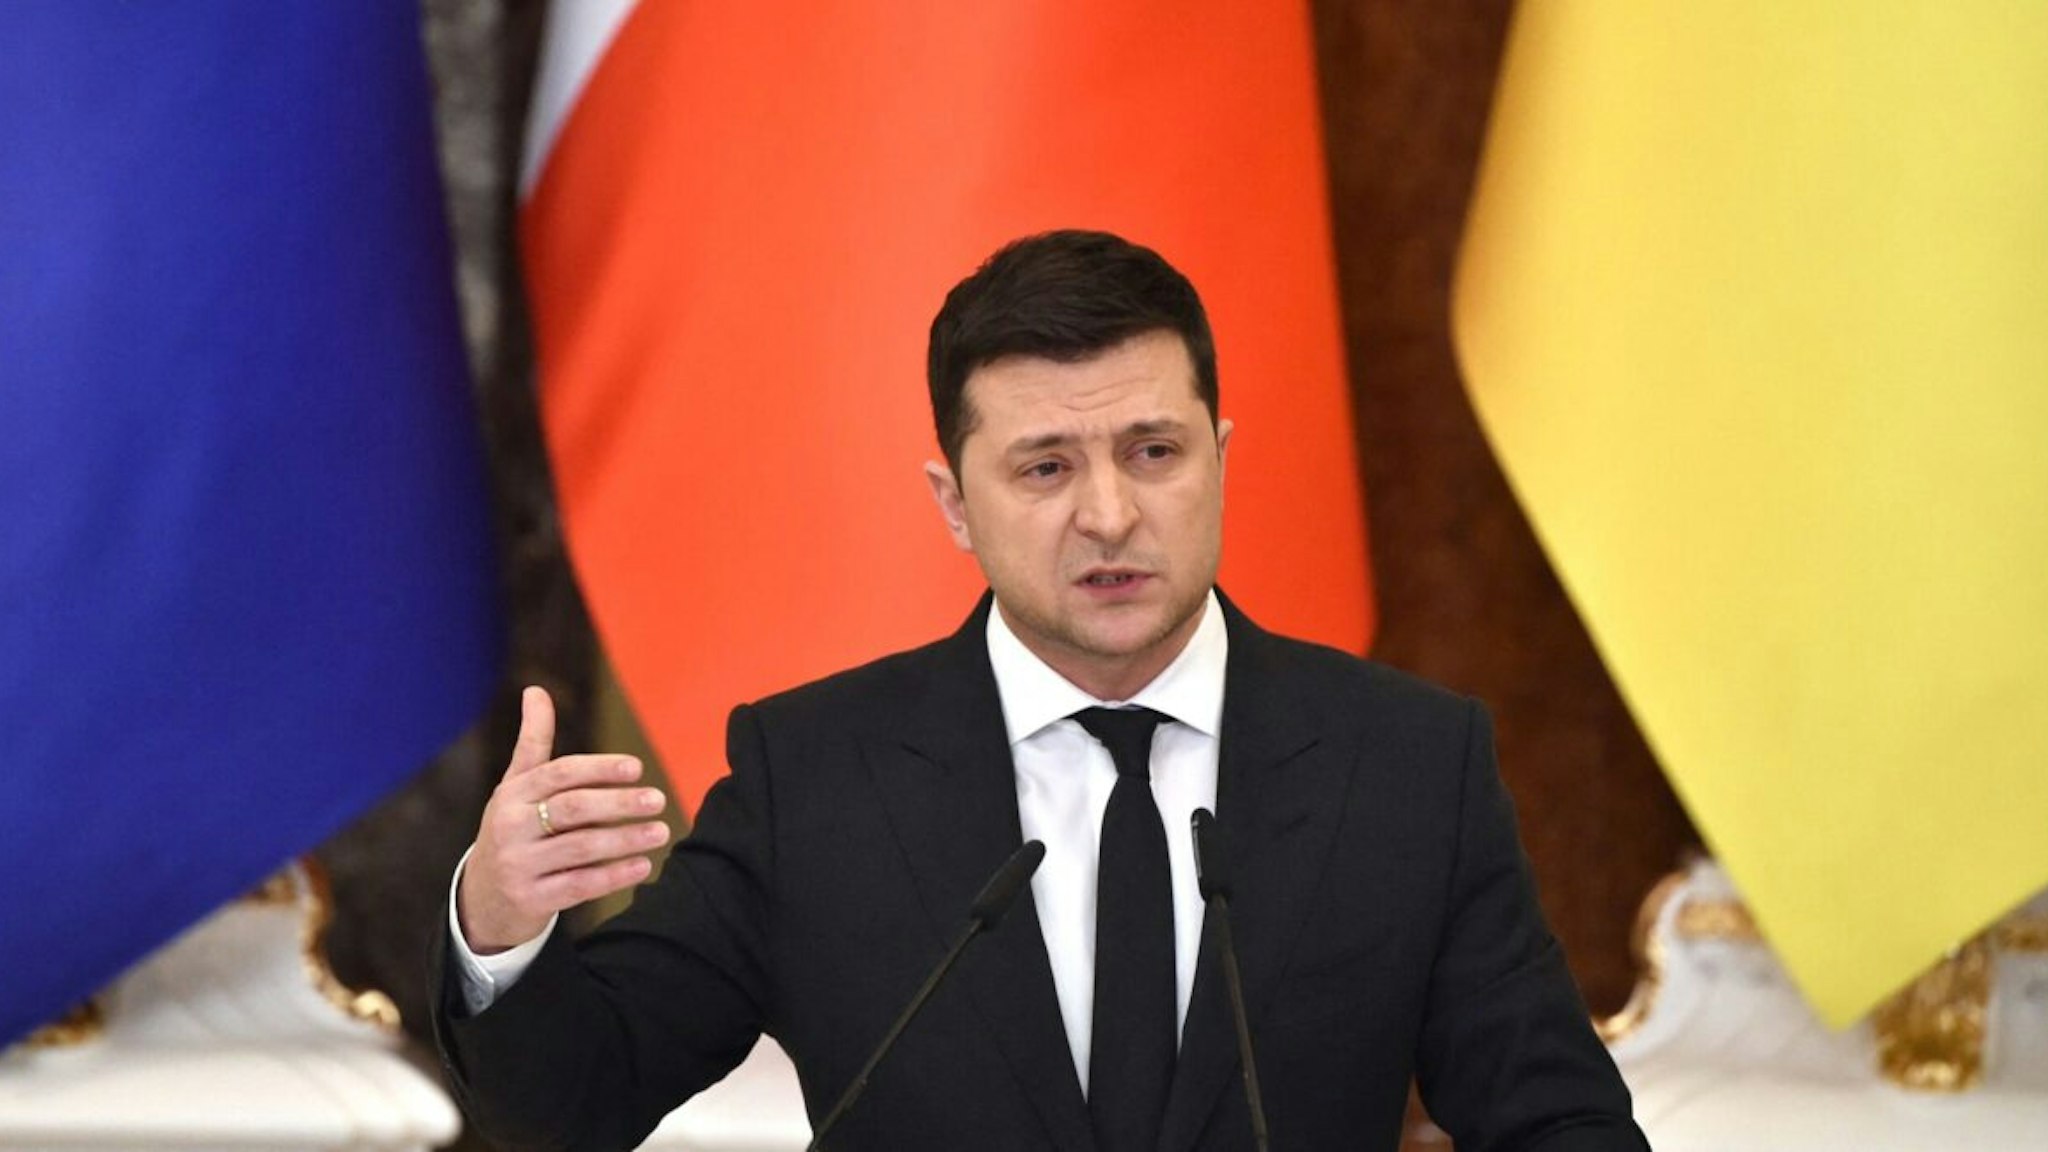 Ukrainian President Volodymyr Zelensky gestures during a joint press conference with French President following their meeting in Kyiv on February 8, 2022.